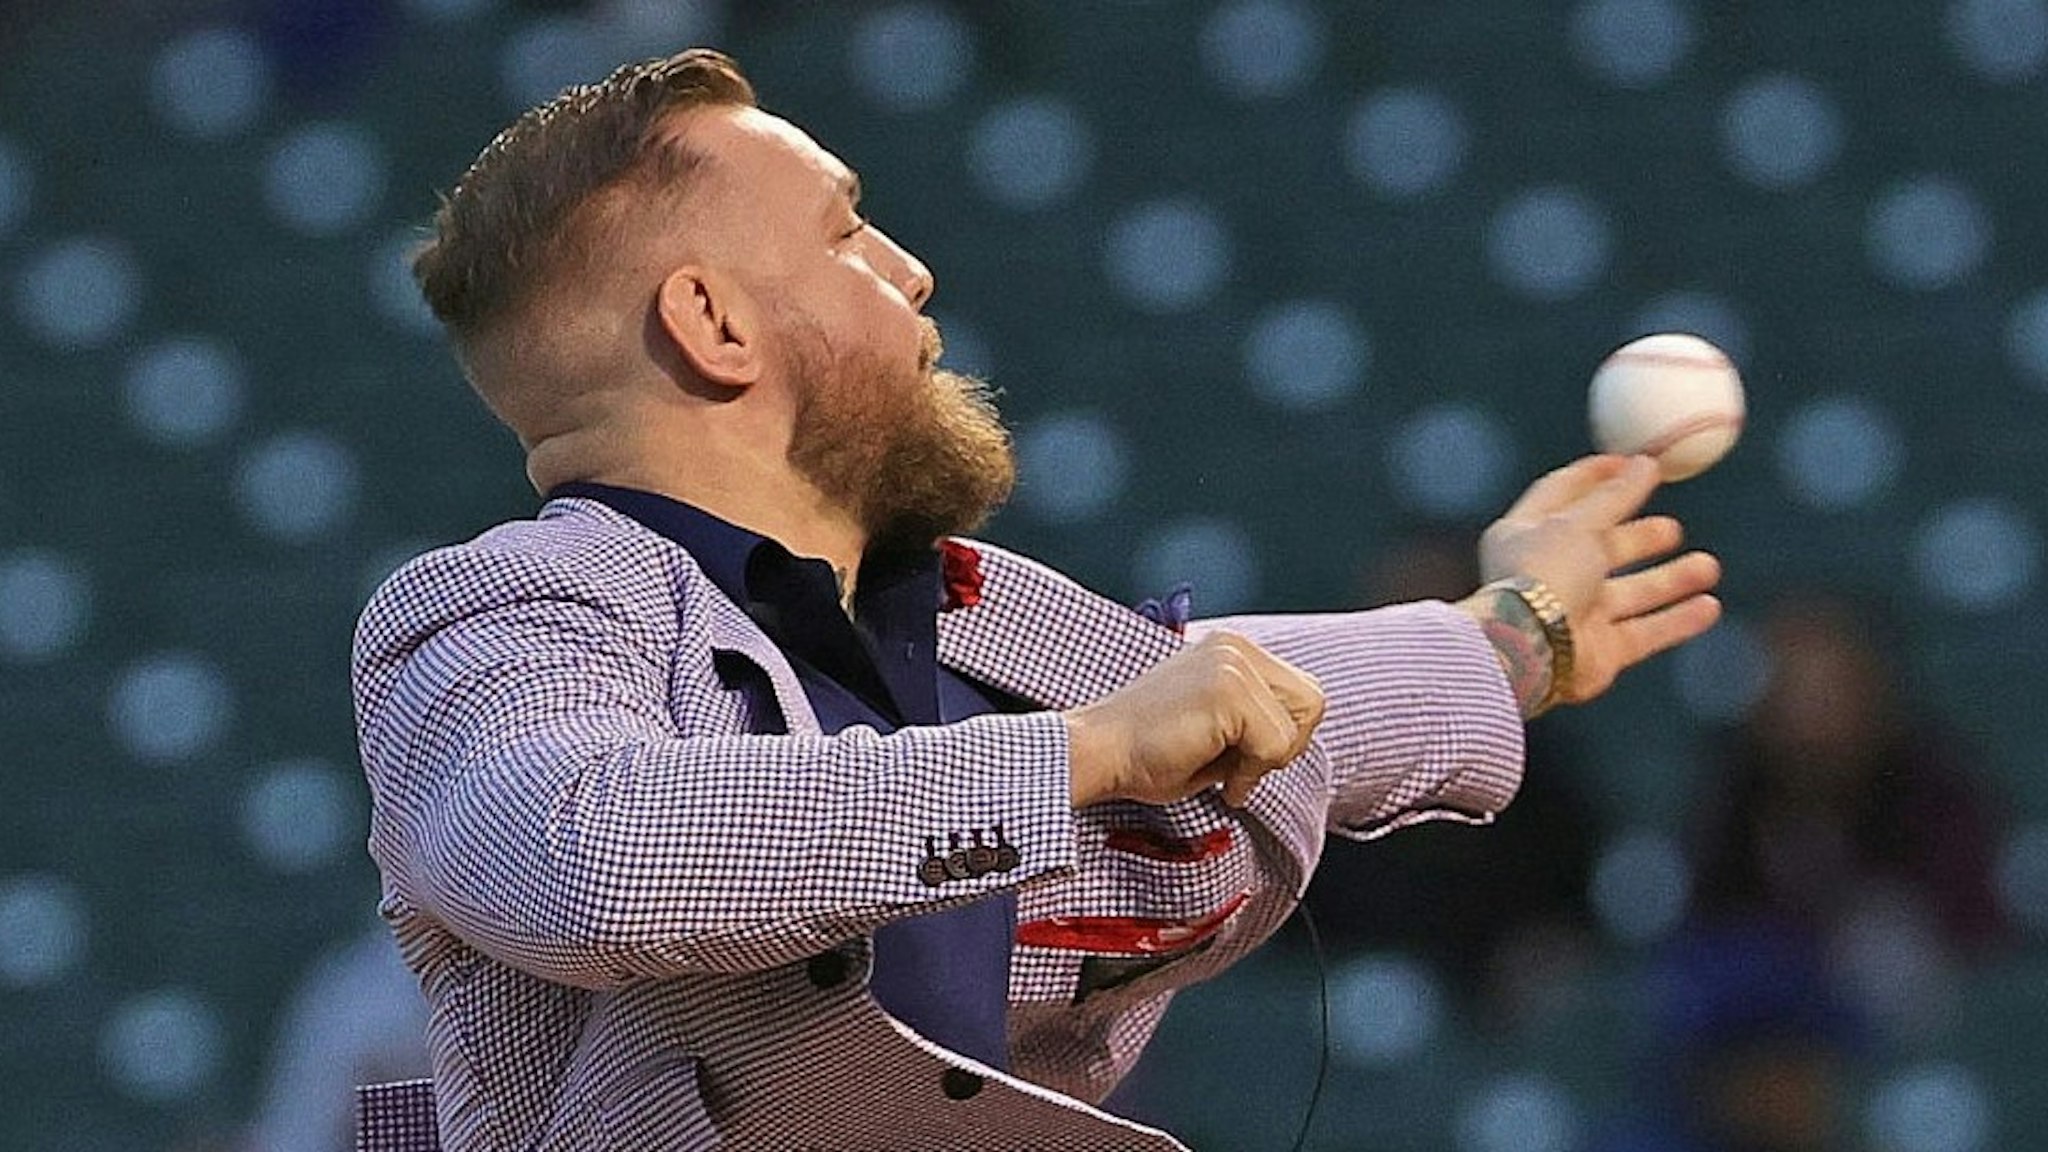 CHICAGO, ILLINOIS - SEPTEMBER 21: Conor McGregor throws out a ceremonial first pitch before the Chicago Cubs take on the Minnesota Twins at Wrigley Field on September 21, 2021 in Chicago, Illinois. (Photo by